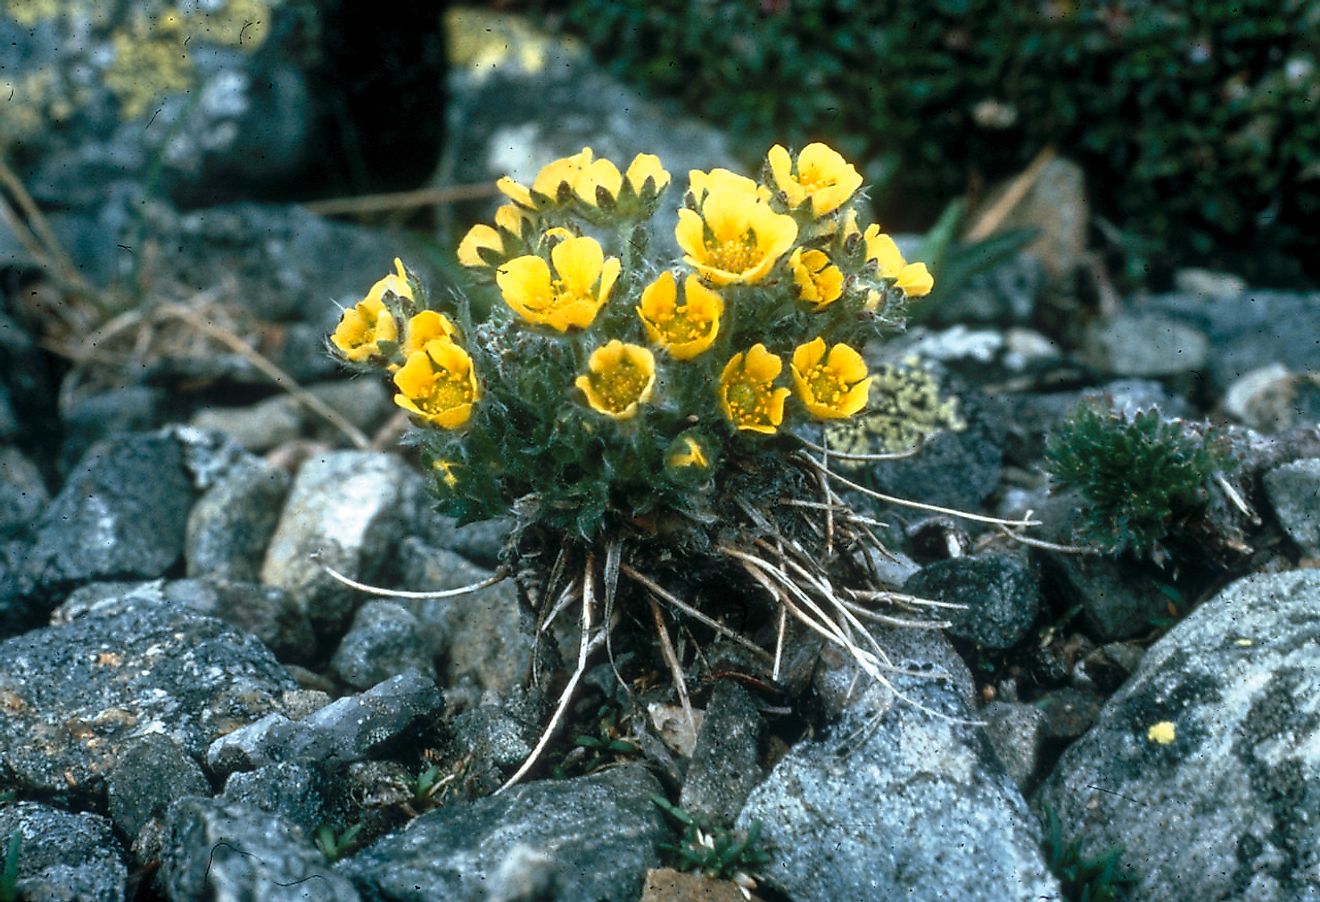 Robbins’ Cinquefoil. Image credit: U.S.D.A. Forest Service, White Mountain National Forest/Wikimedia.org